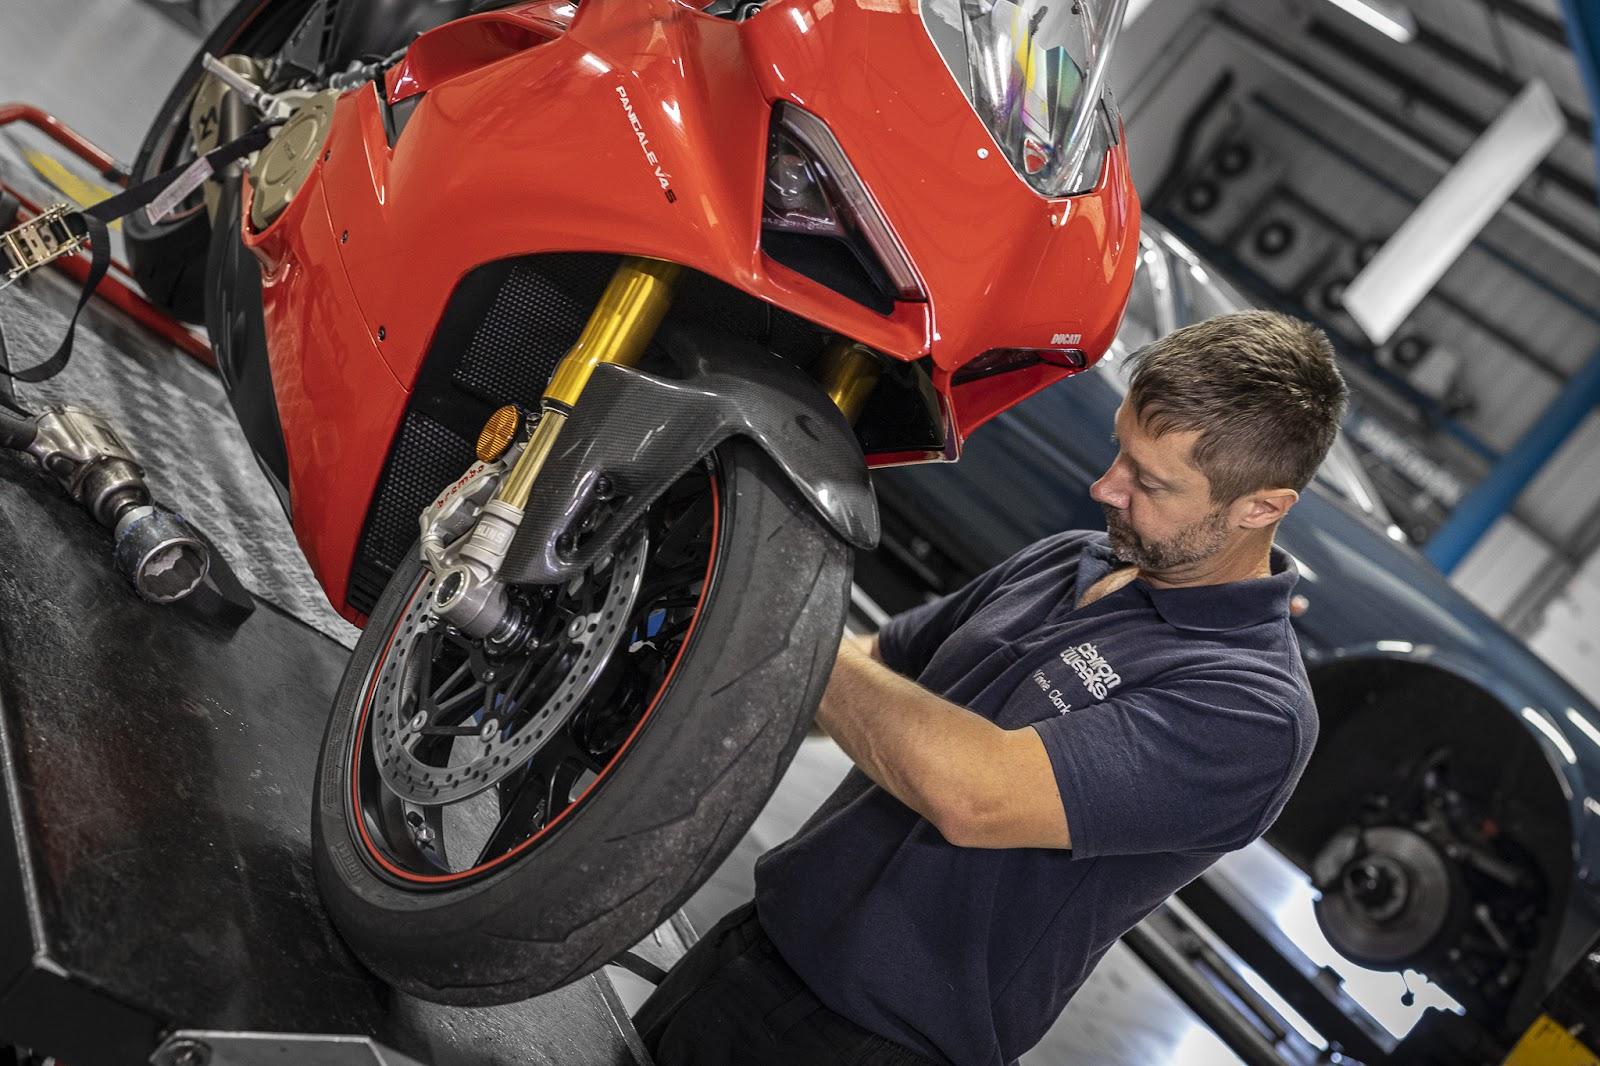 How to remove the wheel from a motorcycle to perform a tyre change